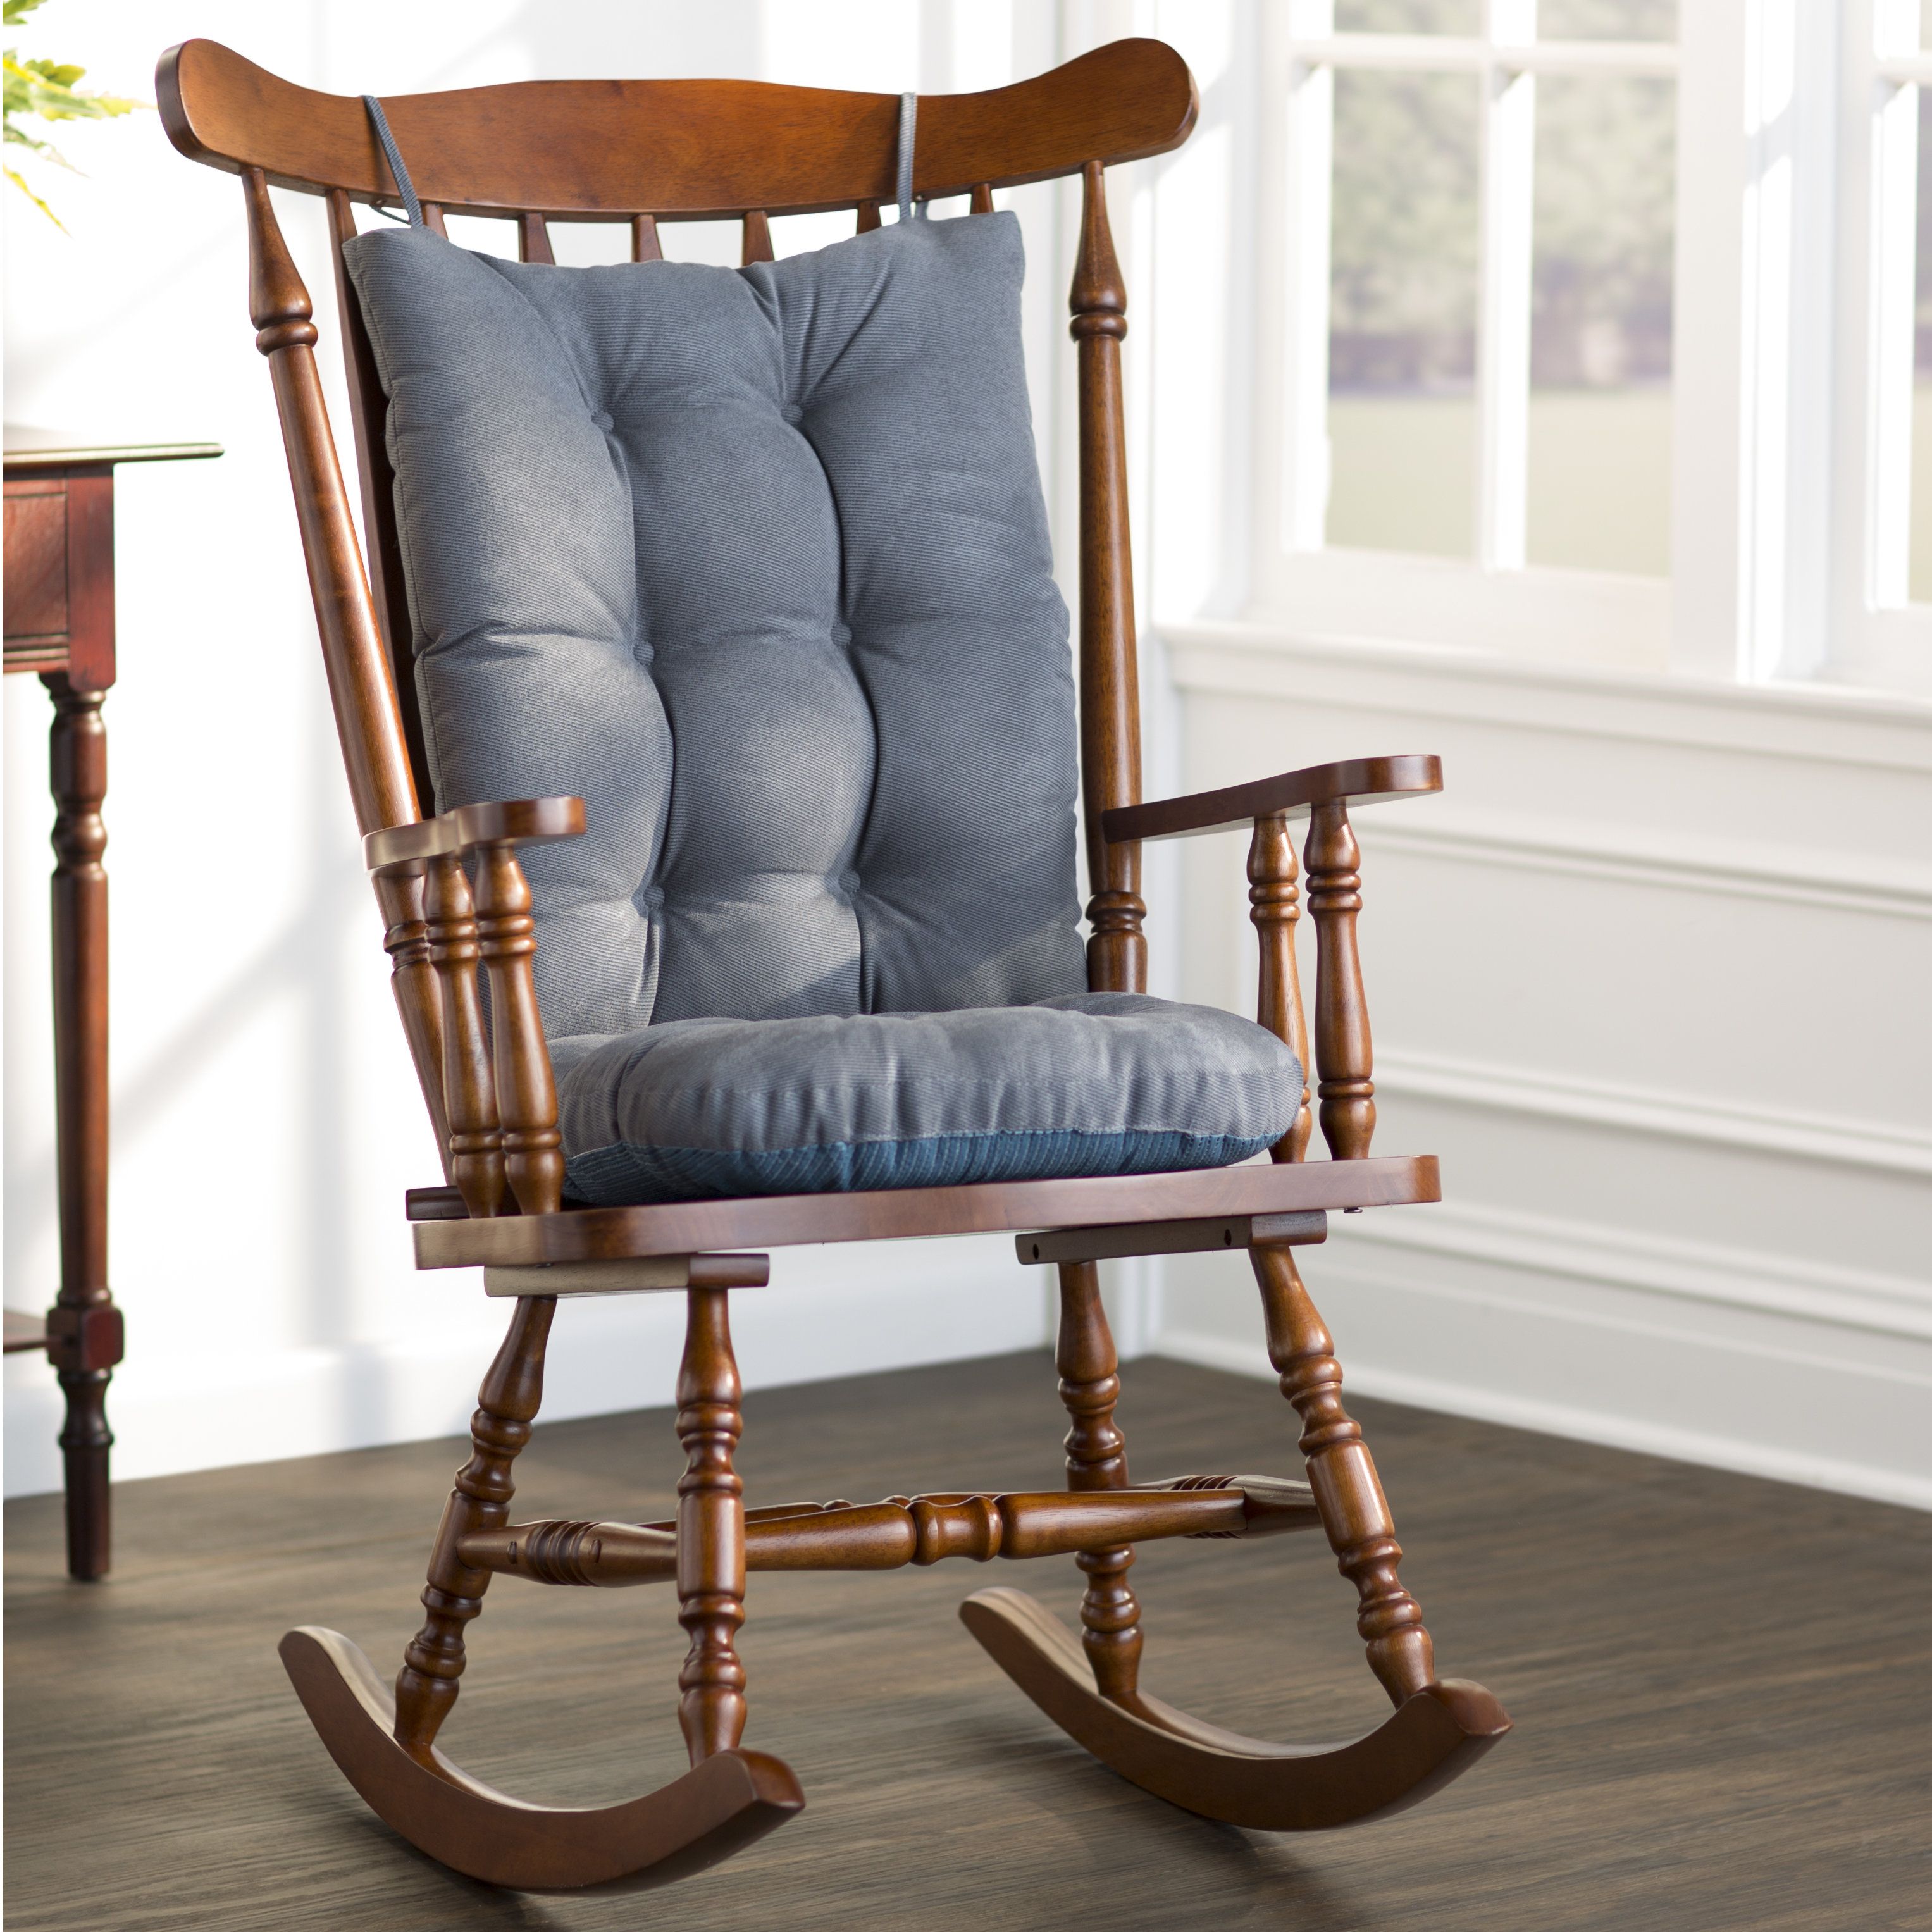 Rocker Cushions | Wayfair Pertaining To Poppy Mission Espresso Rocking Chairs (View 9 of 20)